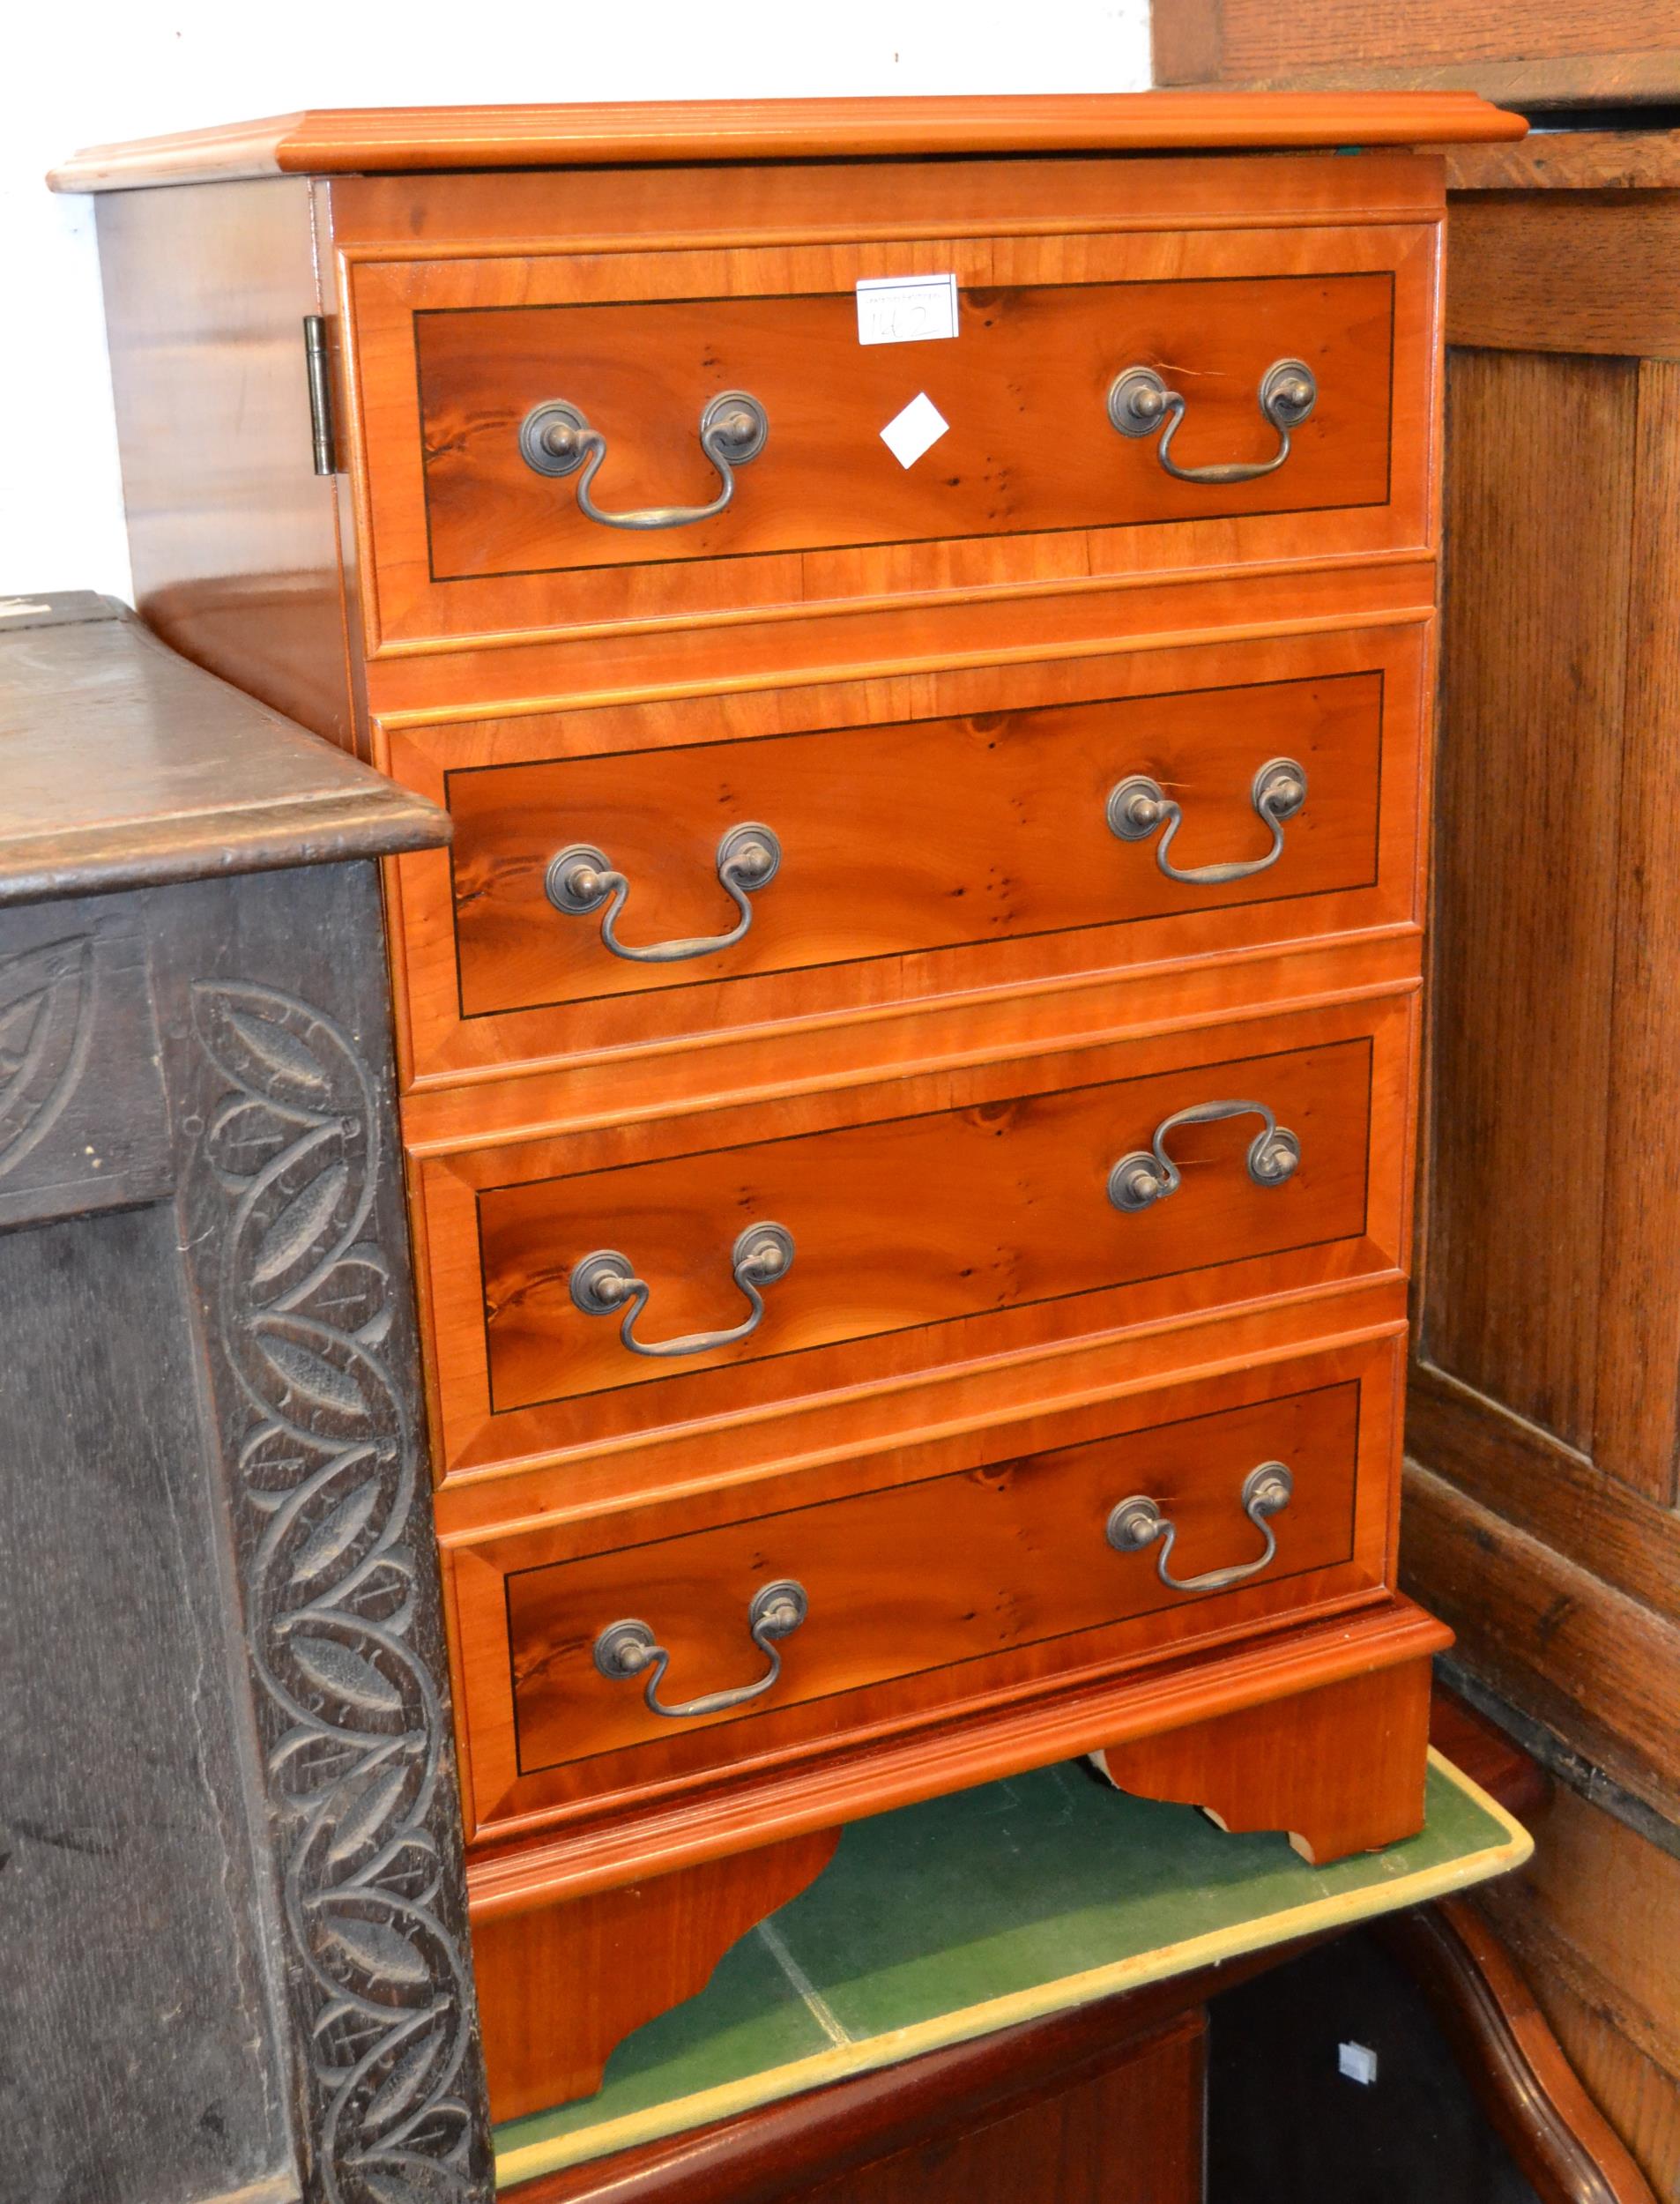 Reproduction yew wood two drawer side table and a similar side cabinet with four simulated drawers - Image 2 of 2